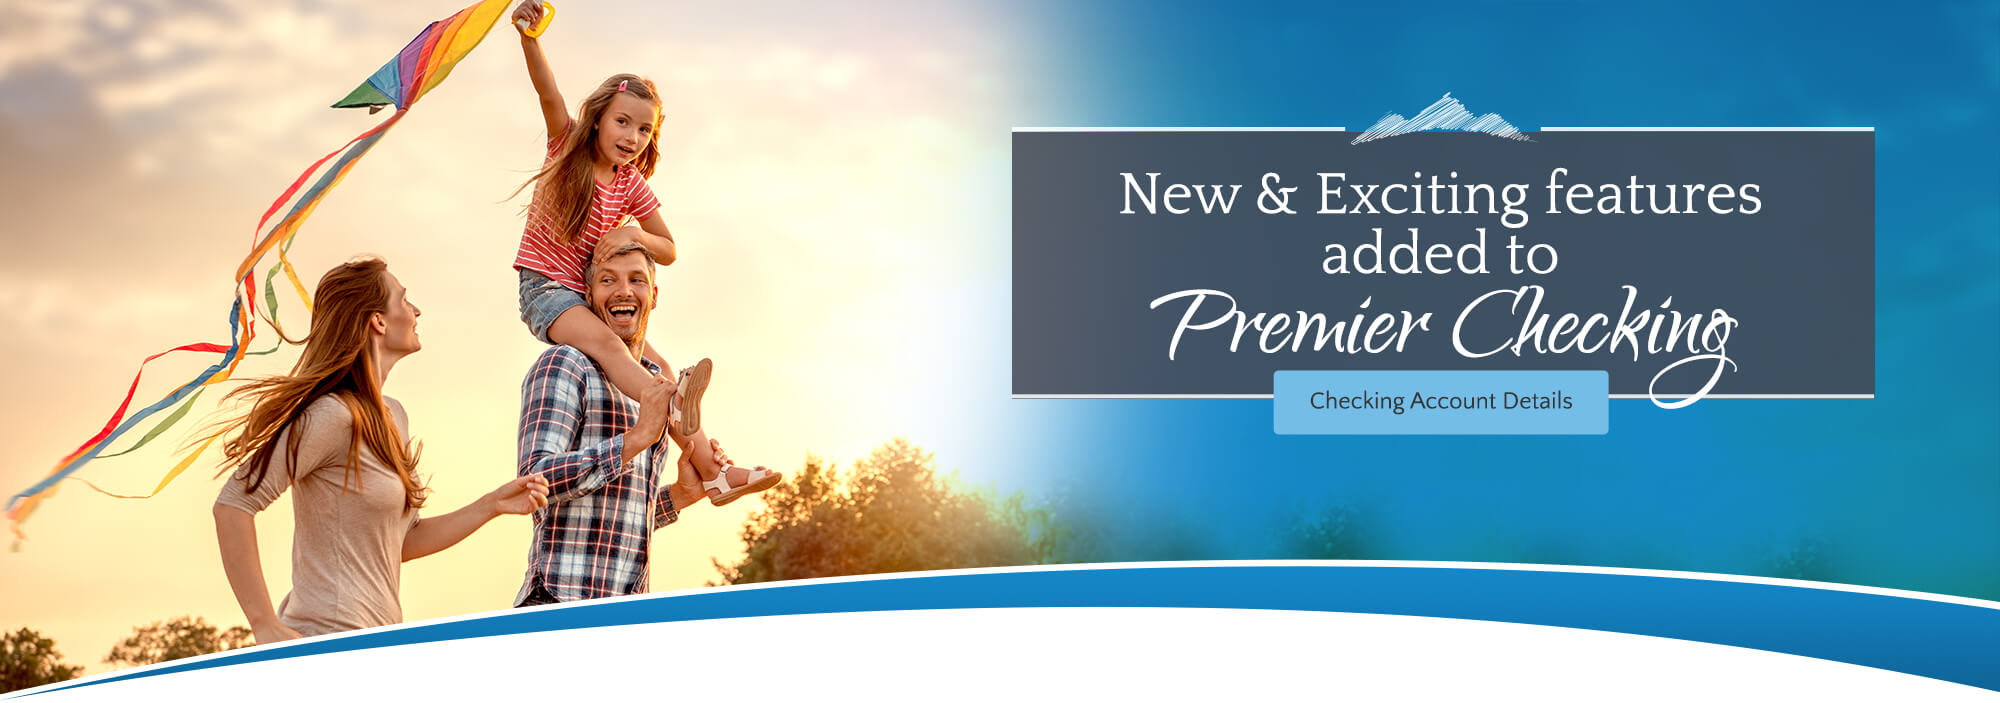 New & Exciting updates to Premier Checking